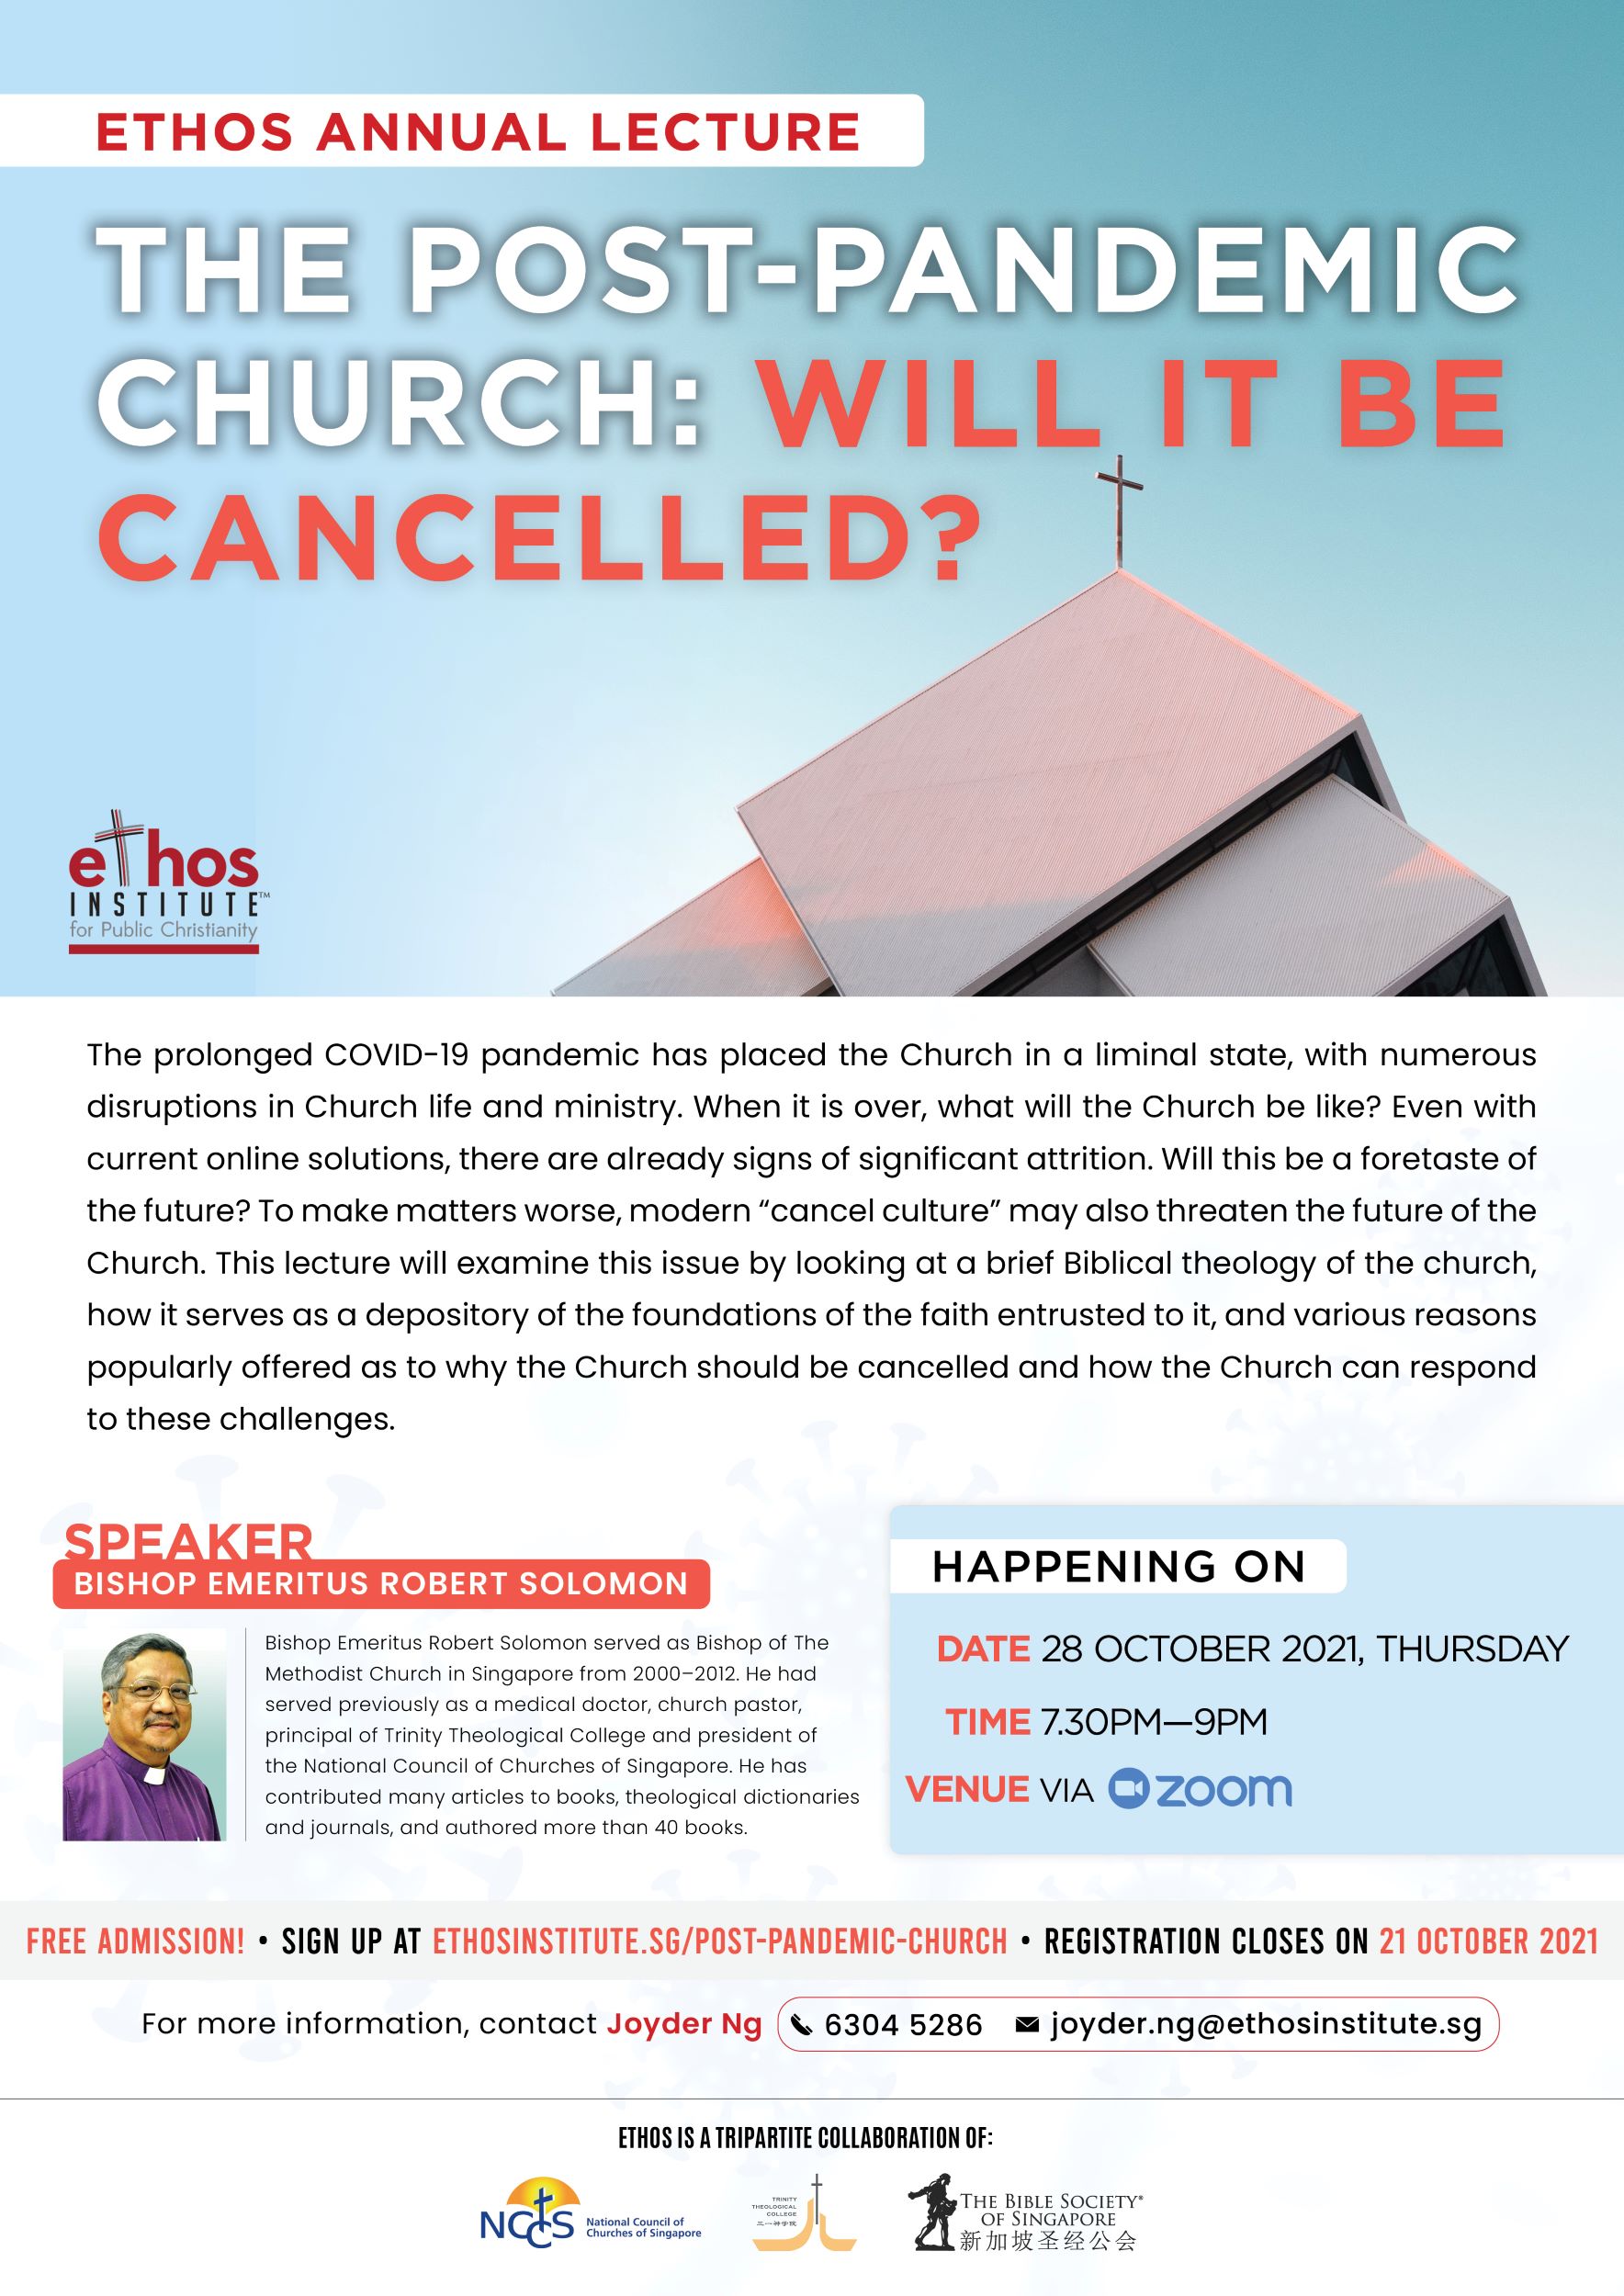 [ETHOS Annual Lecture 2021] The Post-Pandemic Church: Will It Be Cancelled? (Oct 28, Thur @ 1930hr)